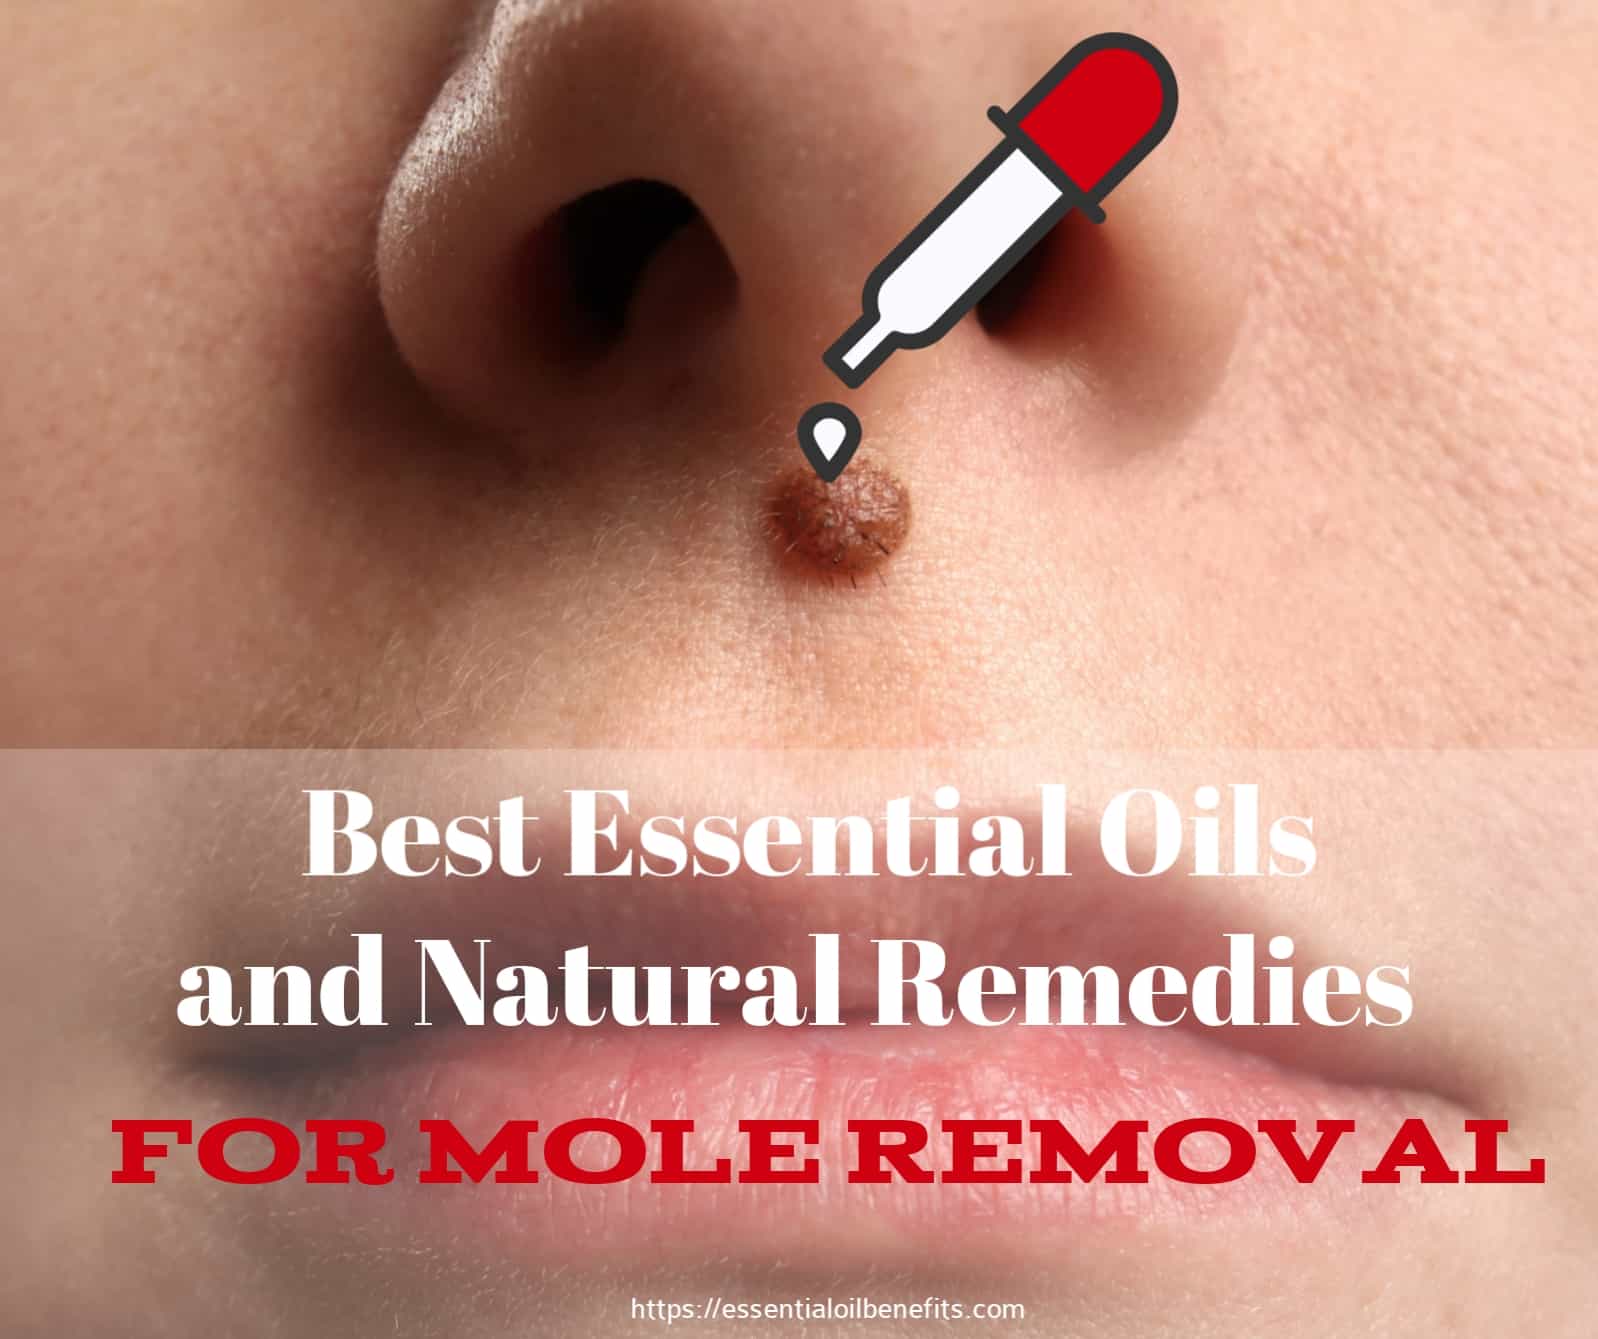 Essential Oils for mole removal